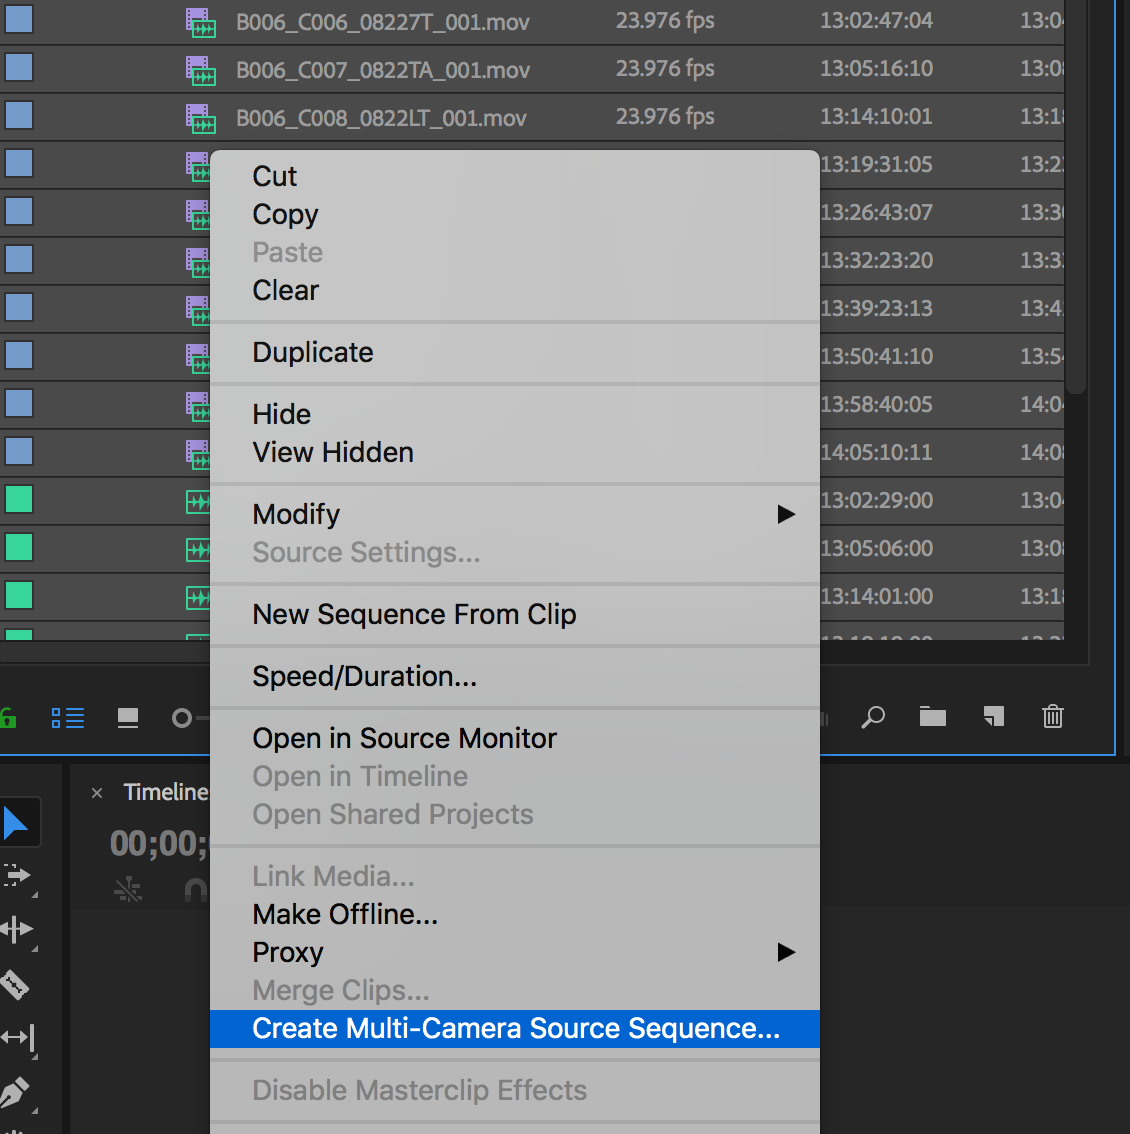 Audio sync in Premiere Pro - creating a Multi-Camera Source Sequence